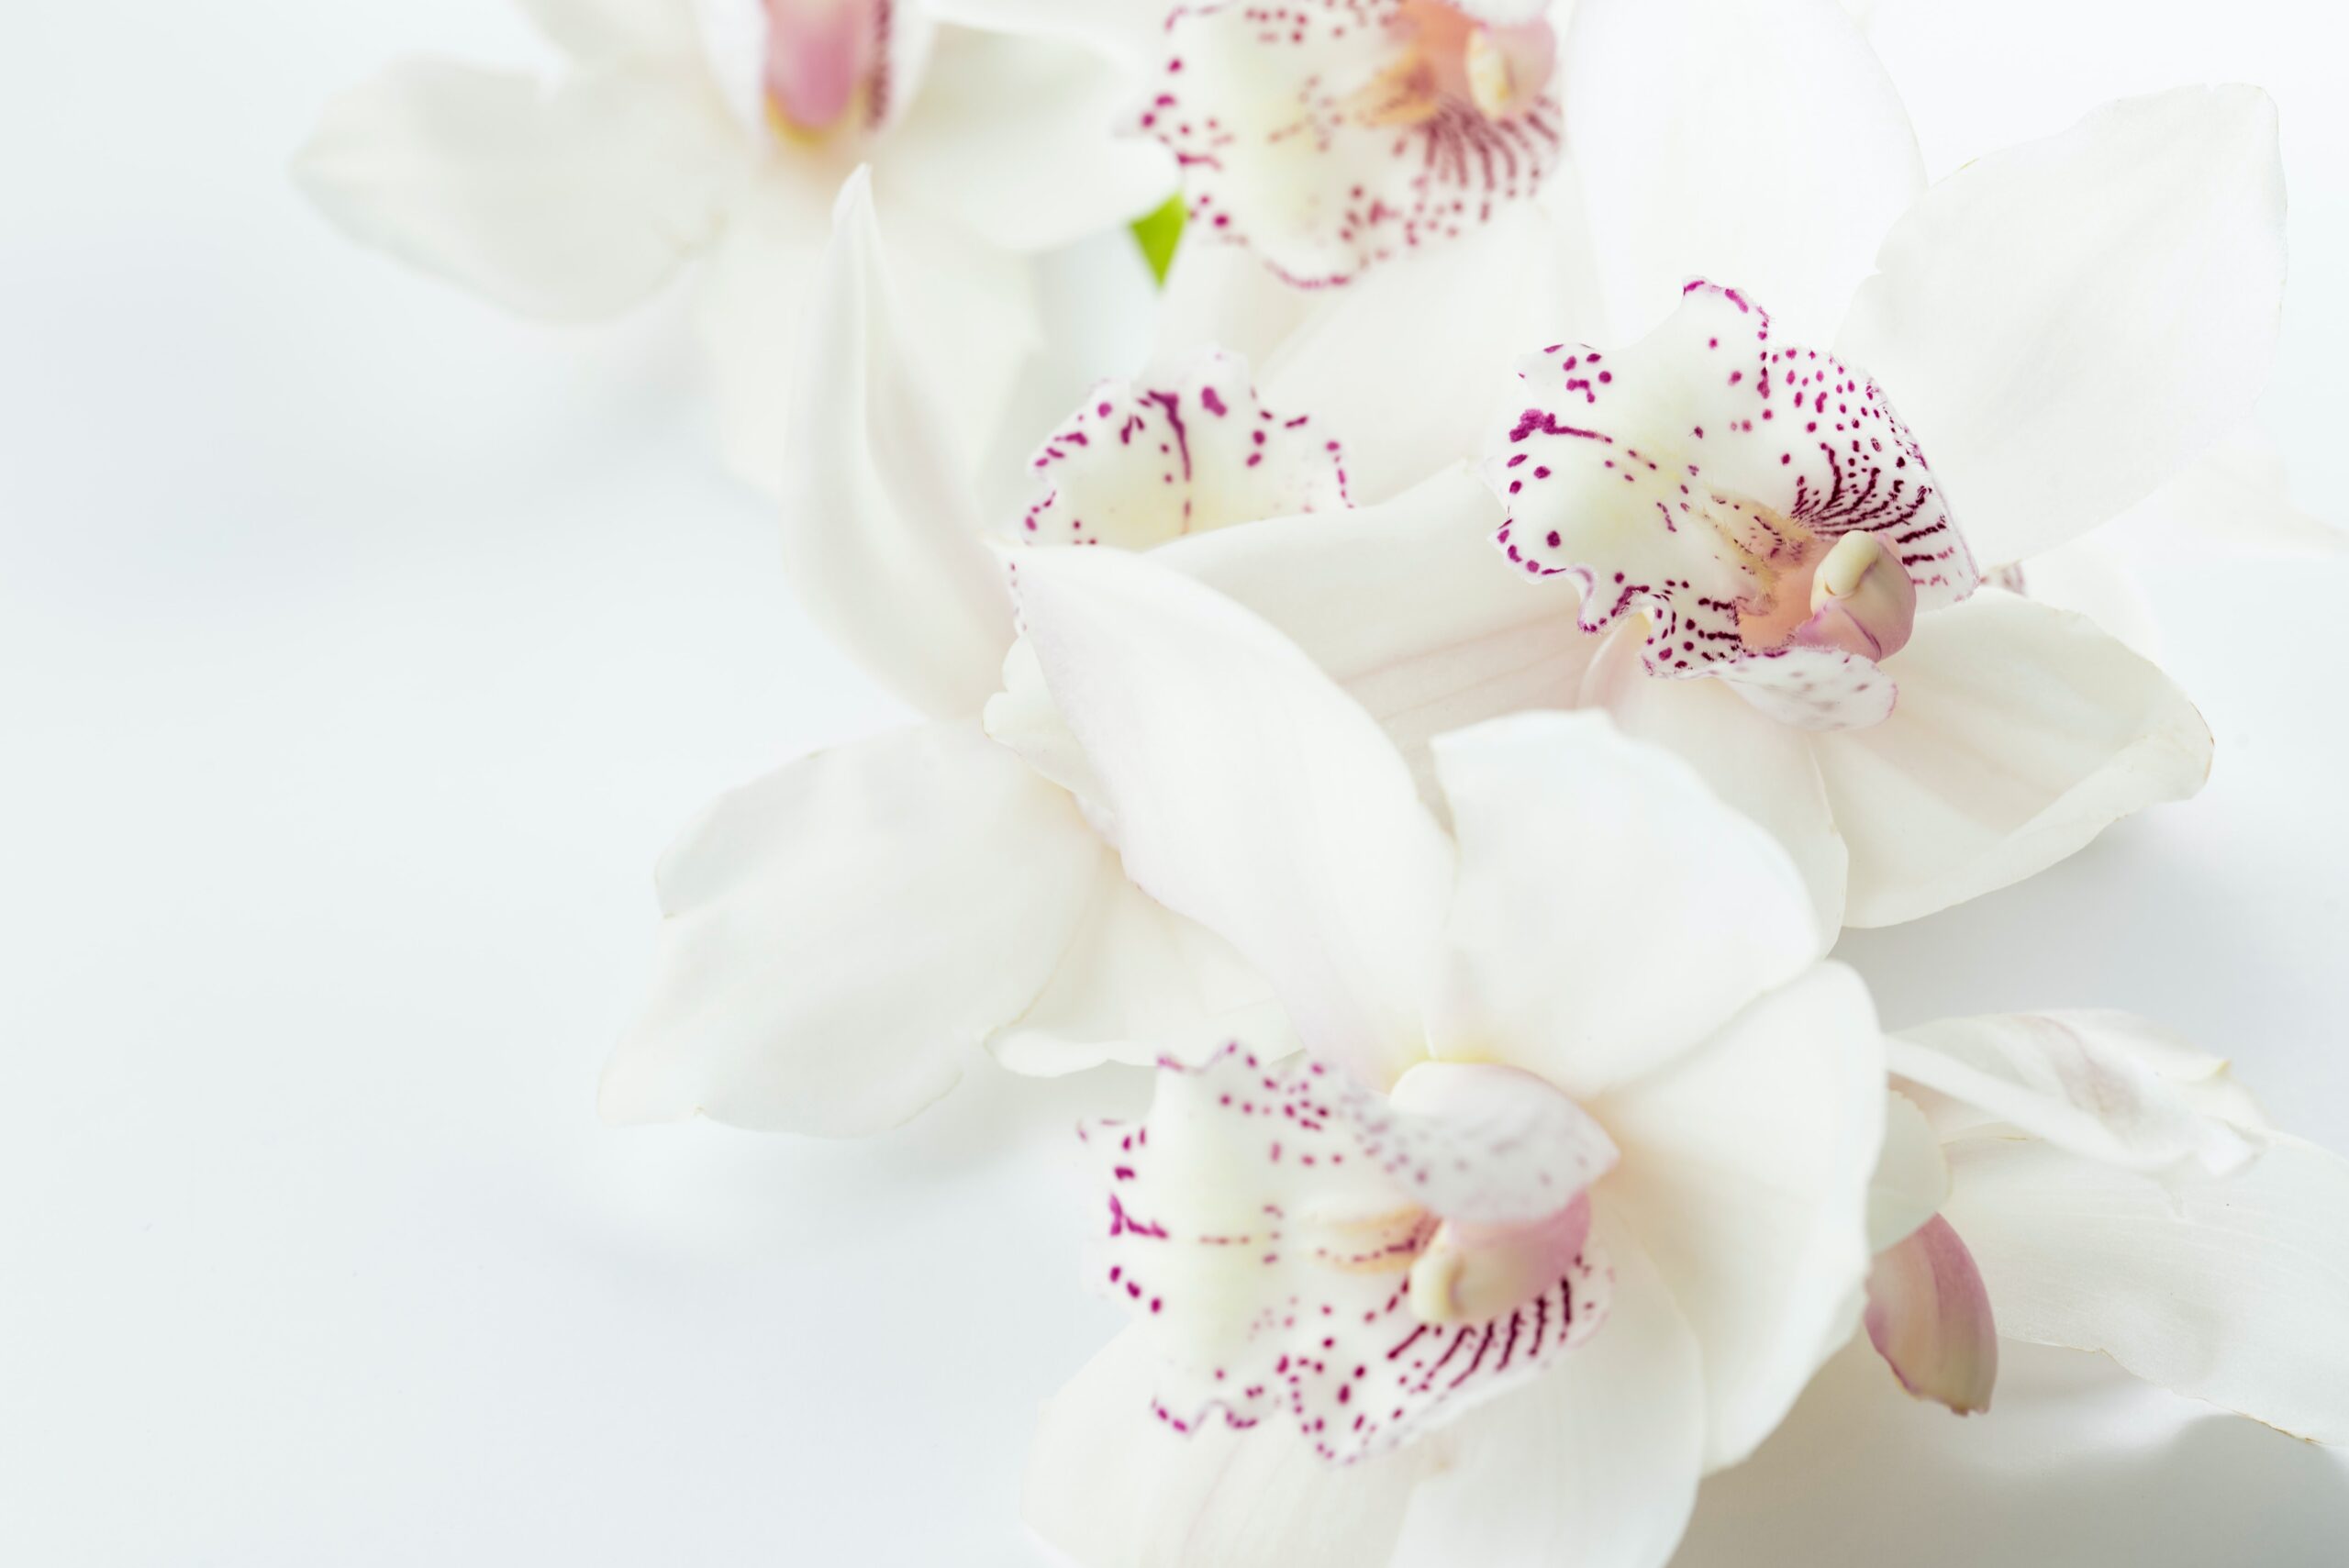 Orchid meaning and symbolism